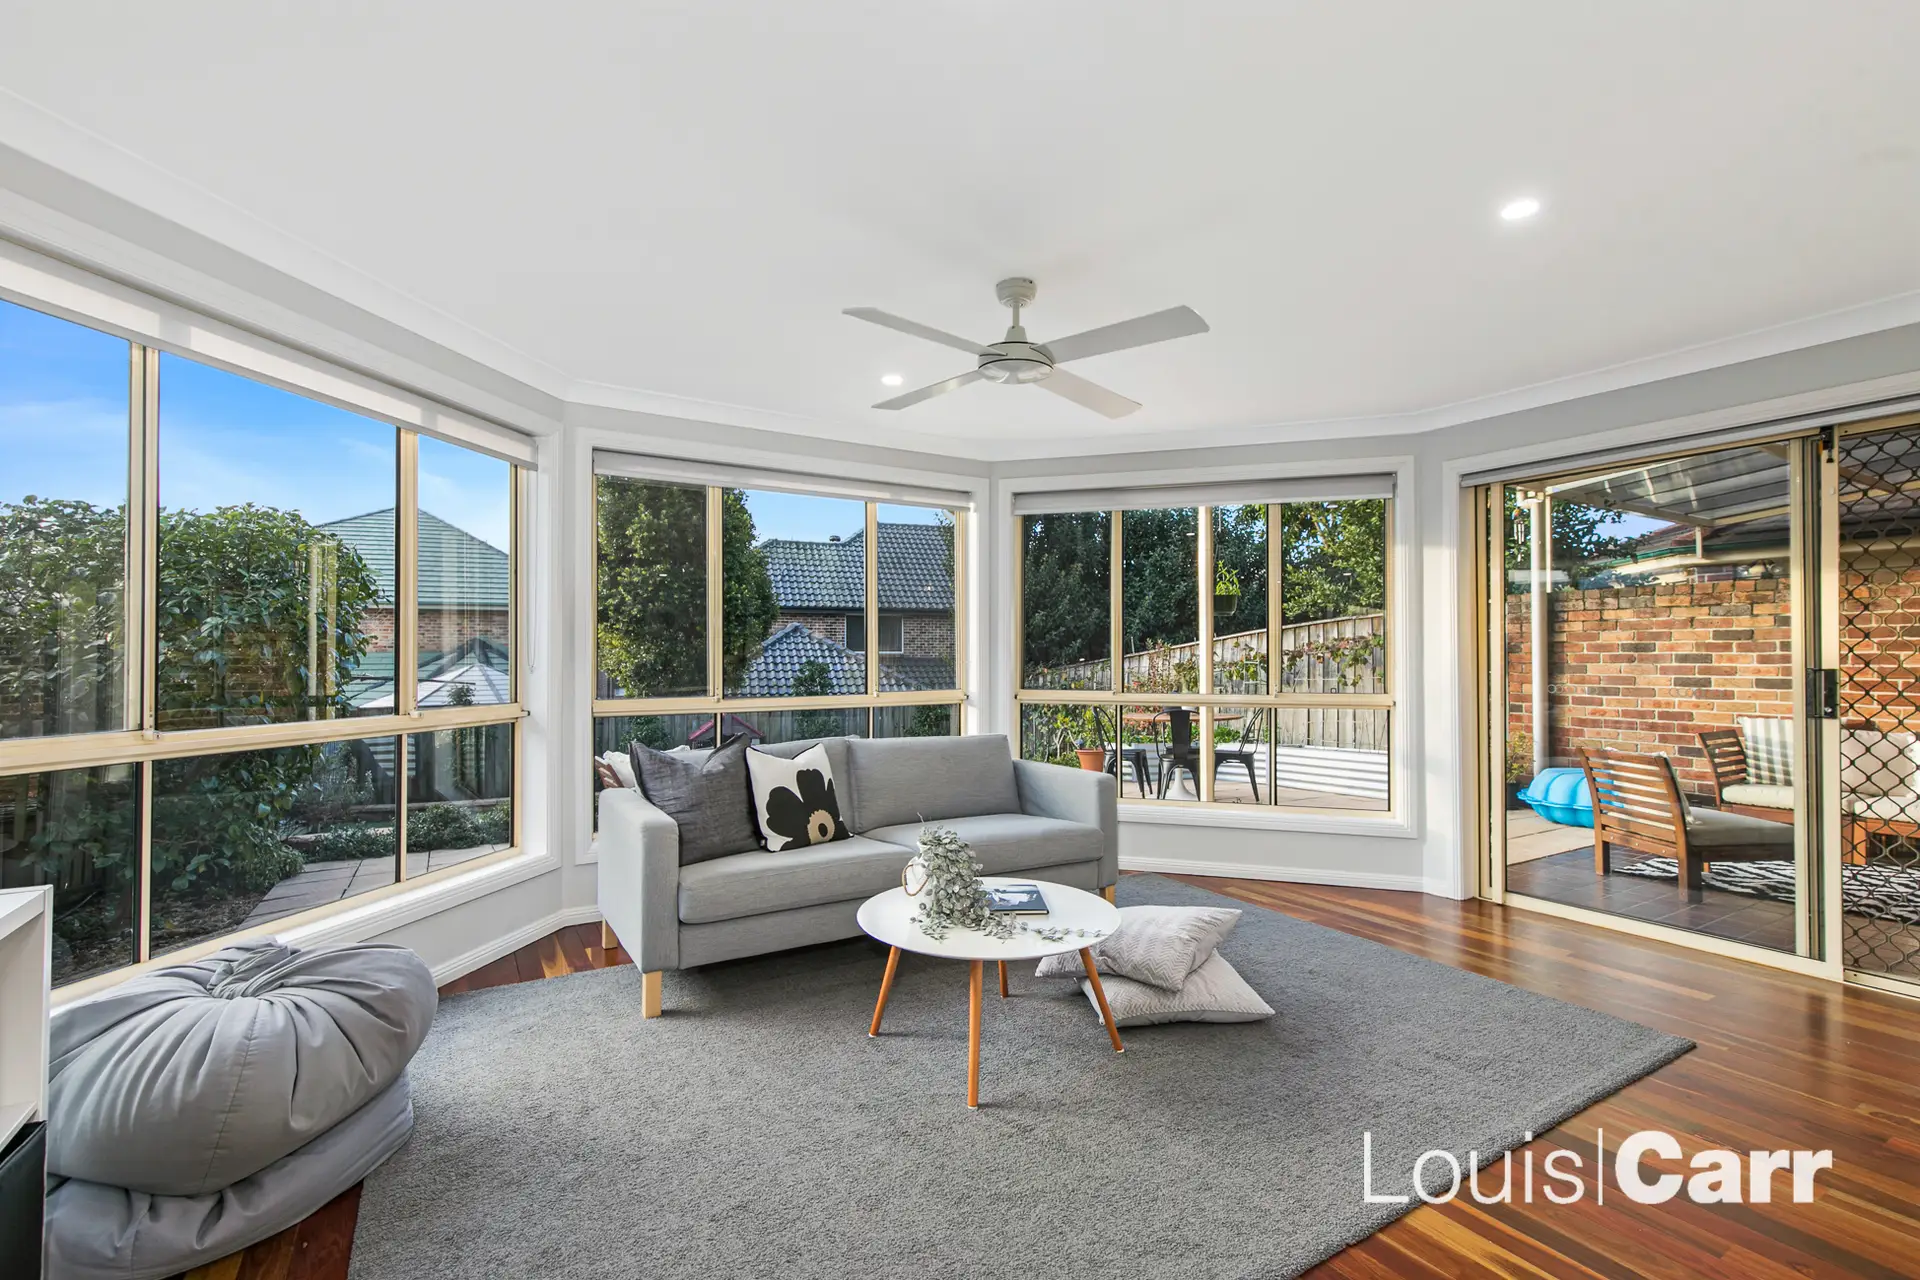 Photo #5: 1/16 Darlington Drive, Cherrybrook - Sold by Louis Carr Real Estate